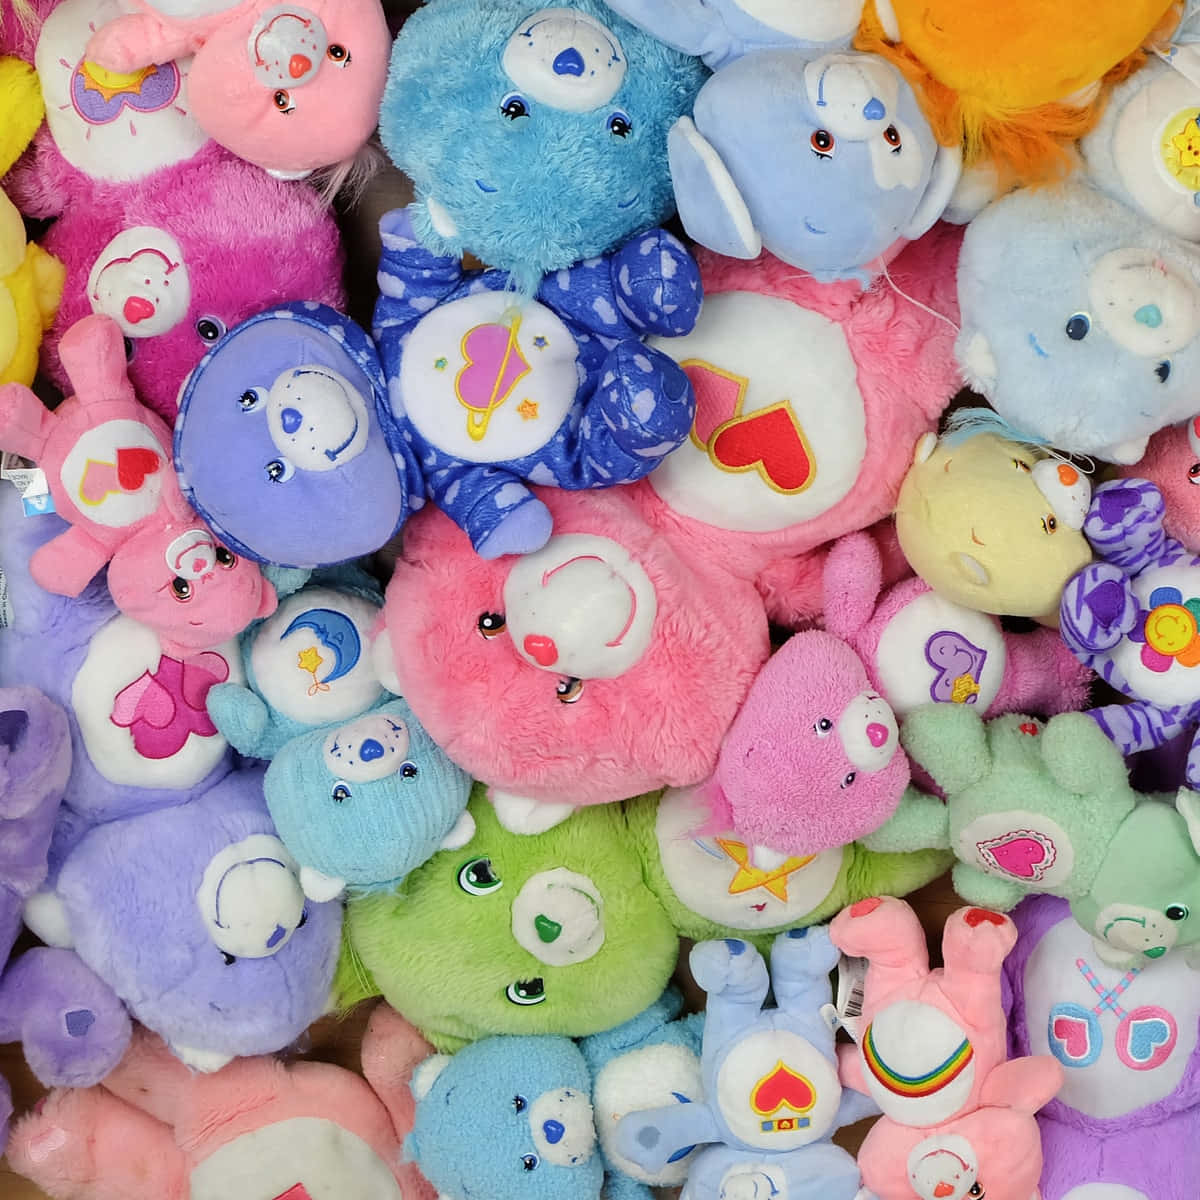 "Share Your Care and Feel the Magic with the Care Bears!"